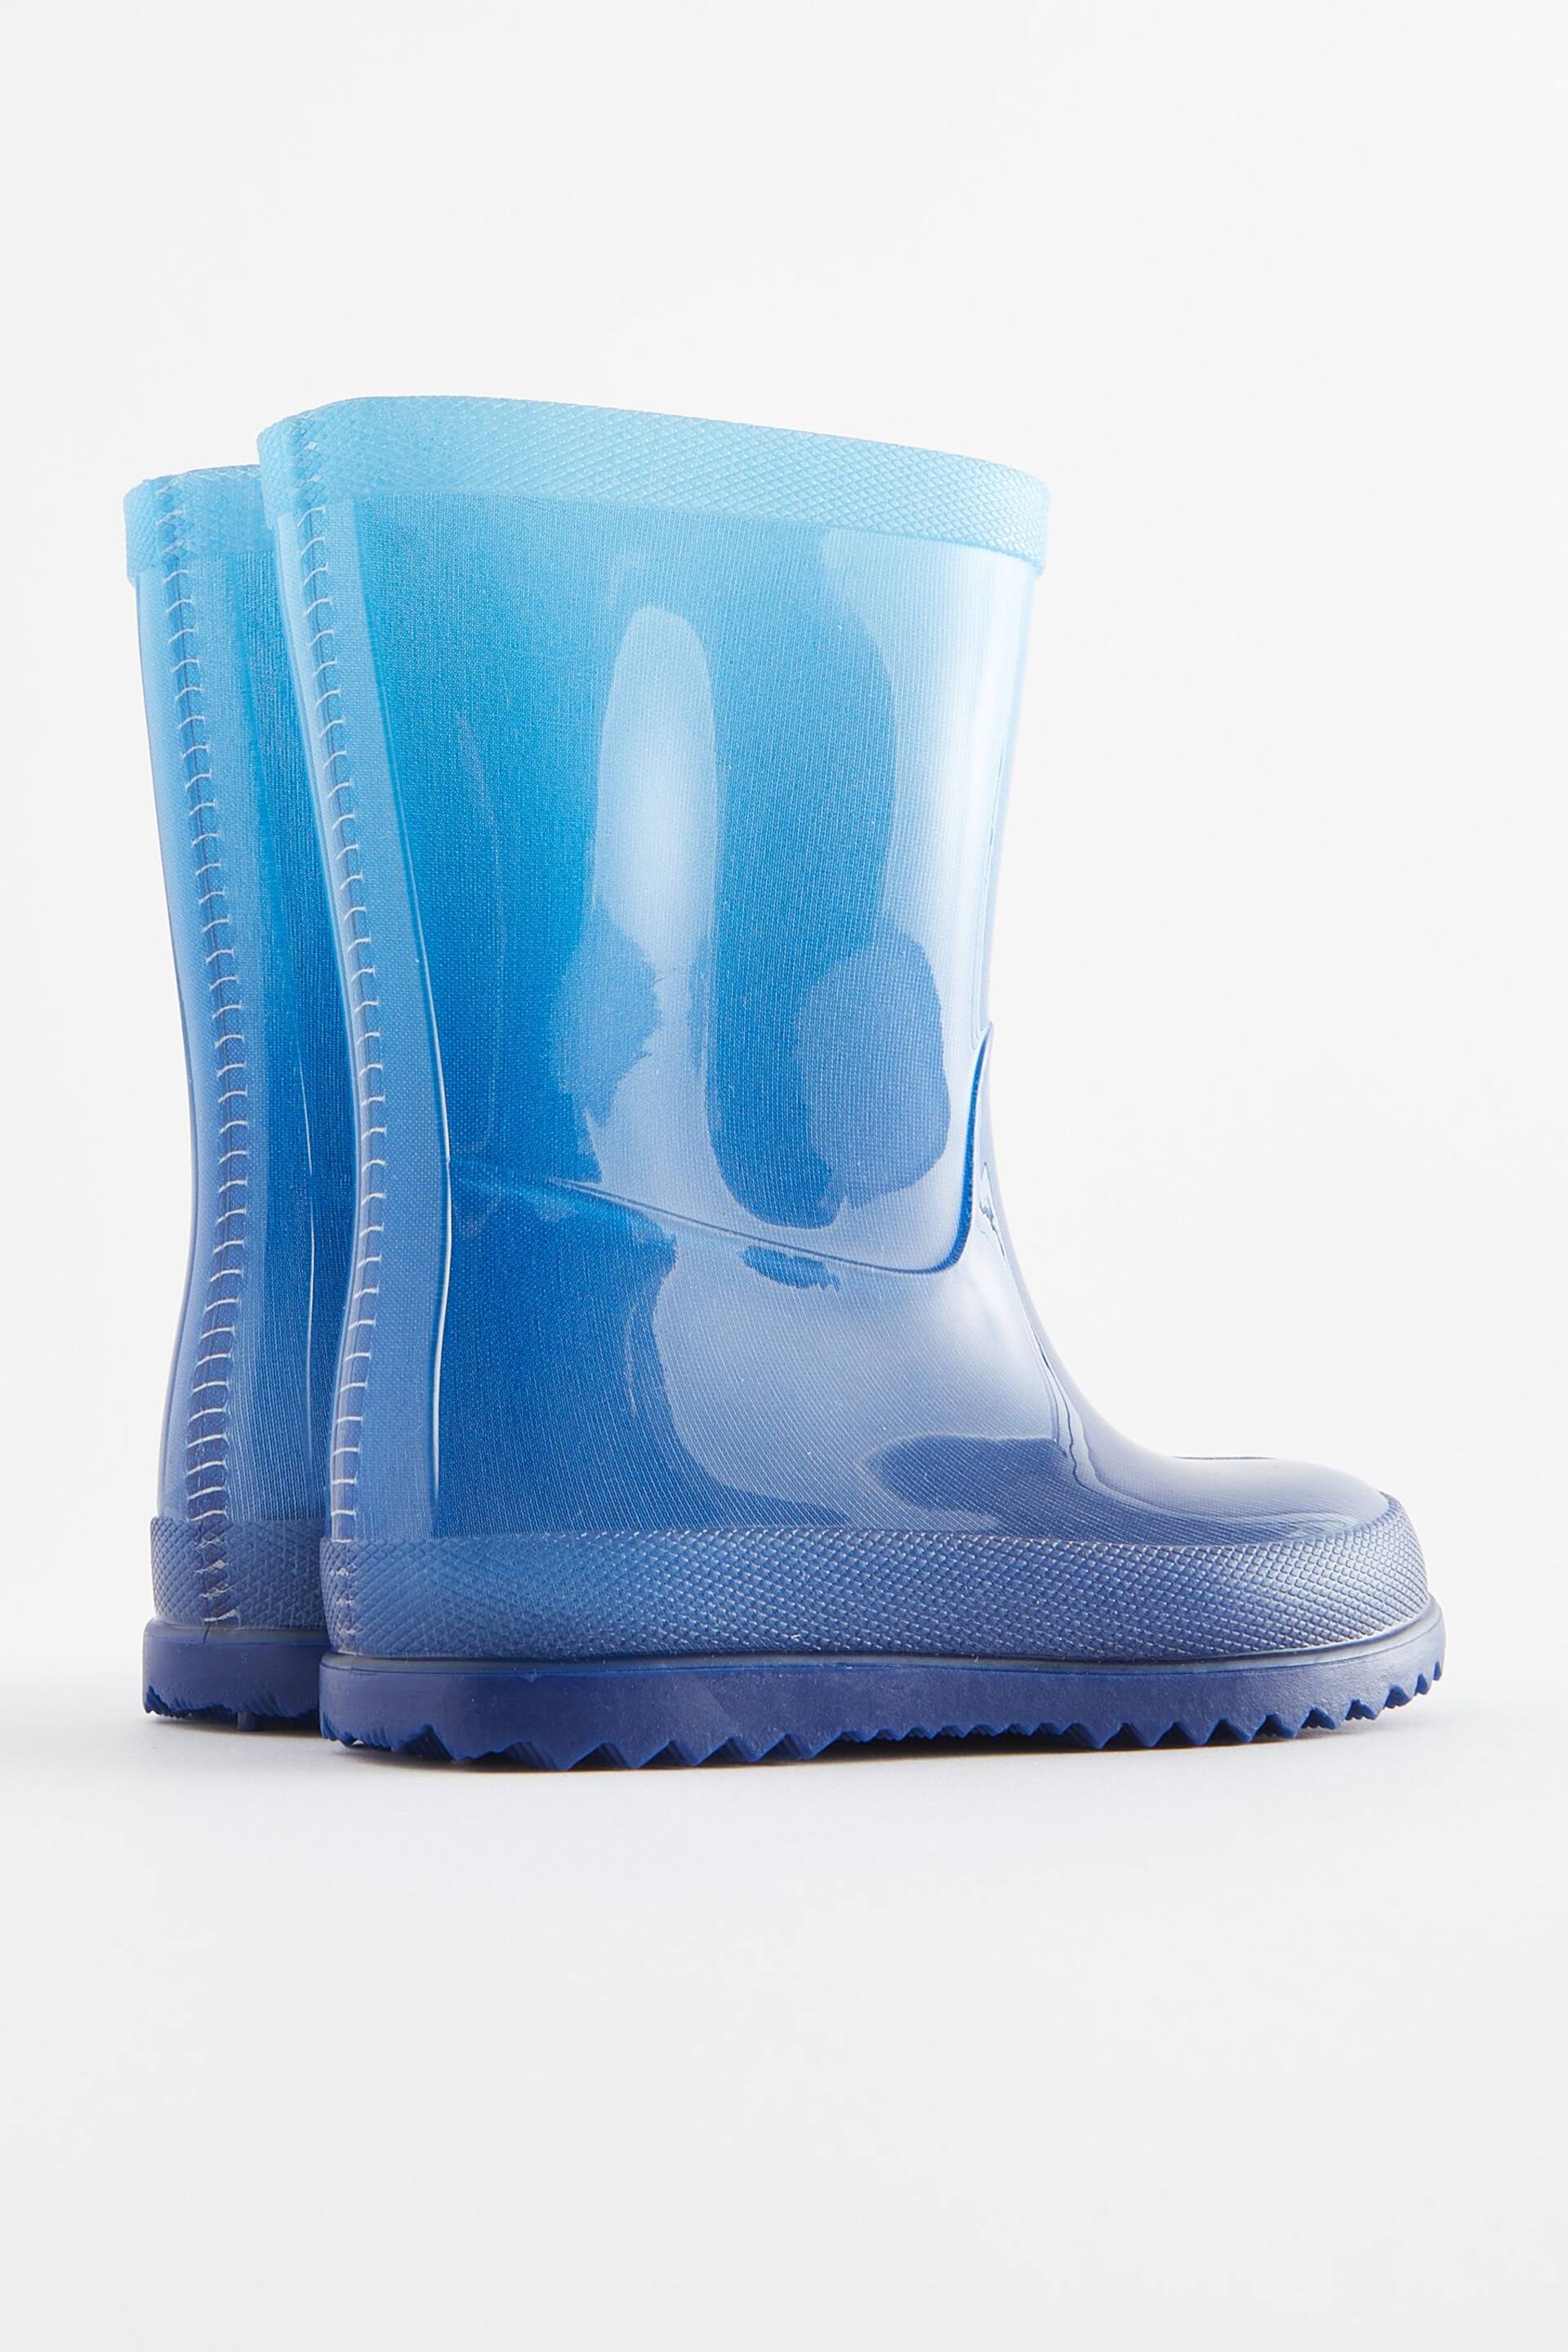 Blue Wellies - Image 2 of 4